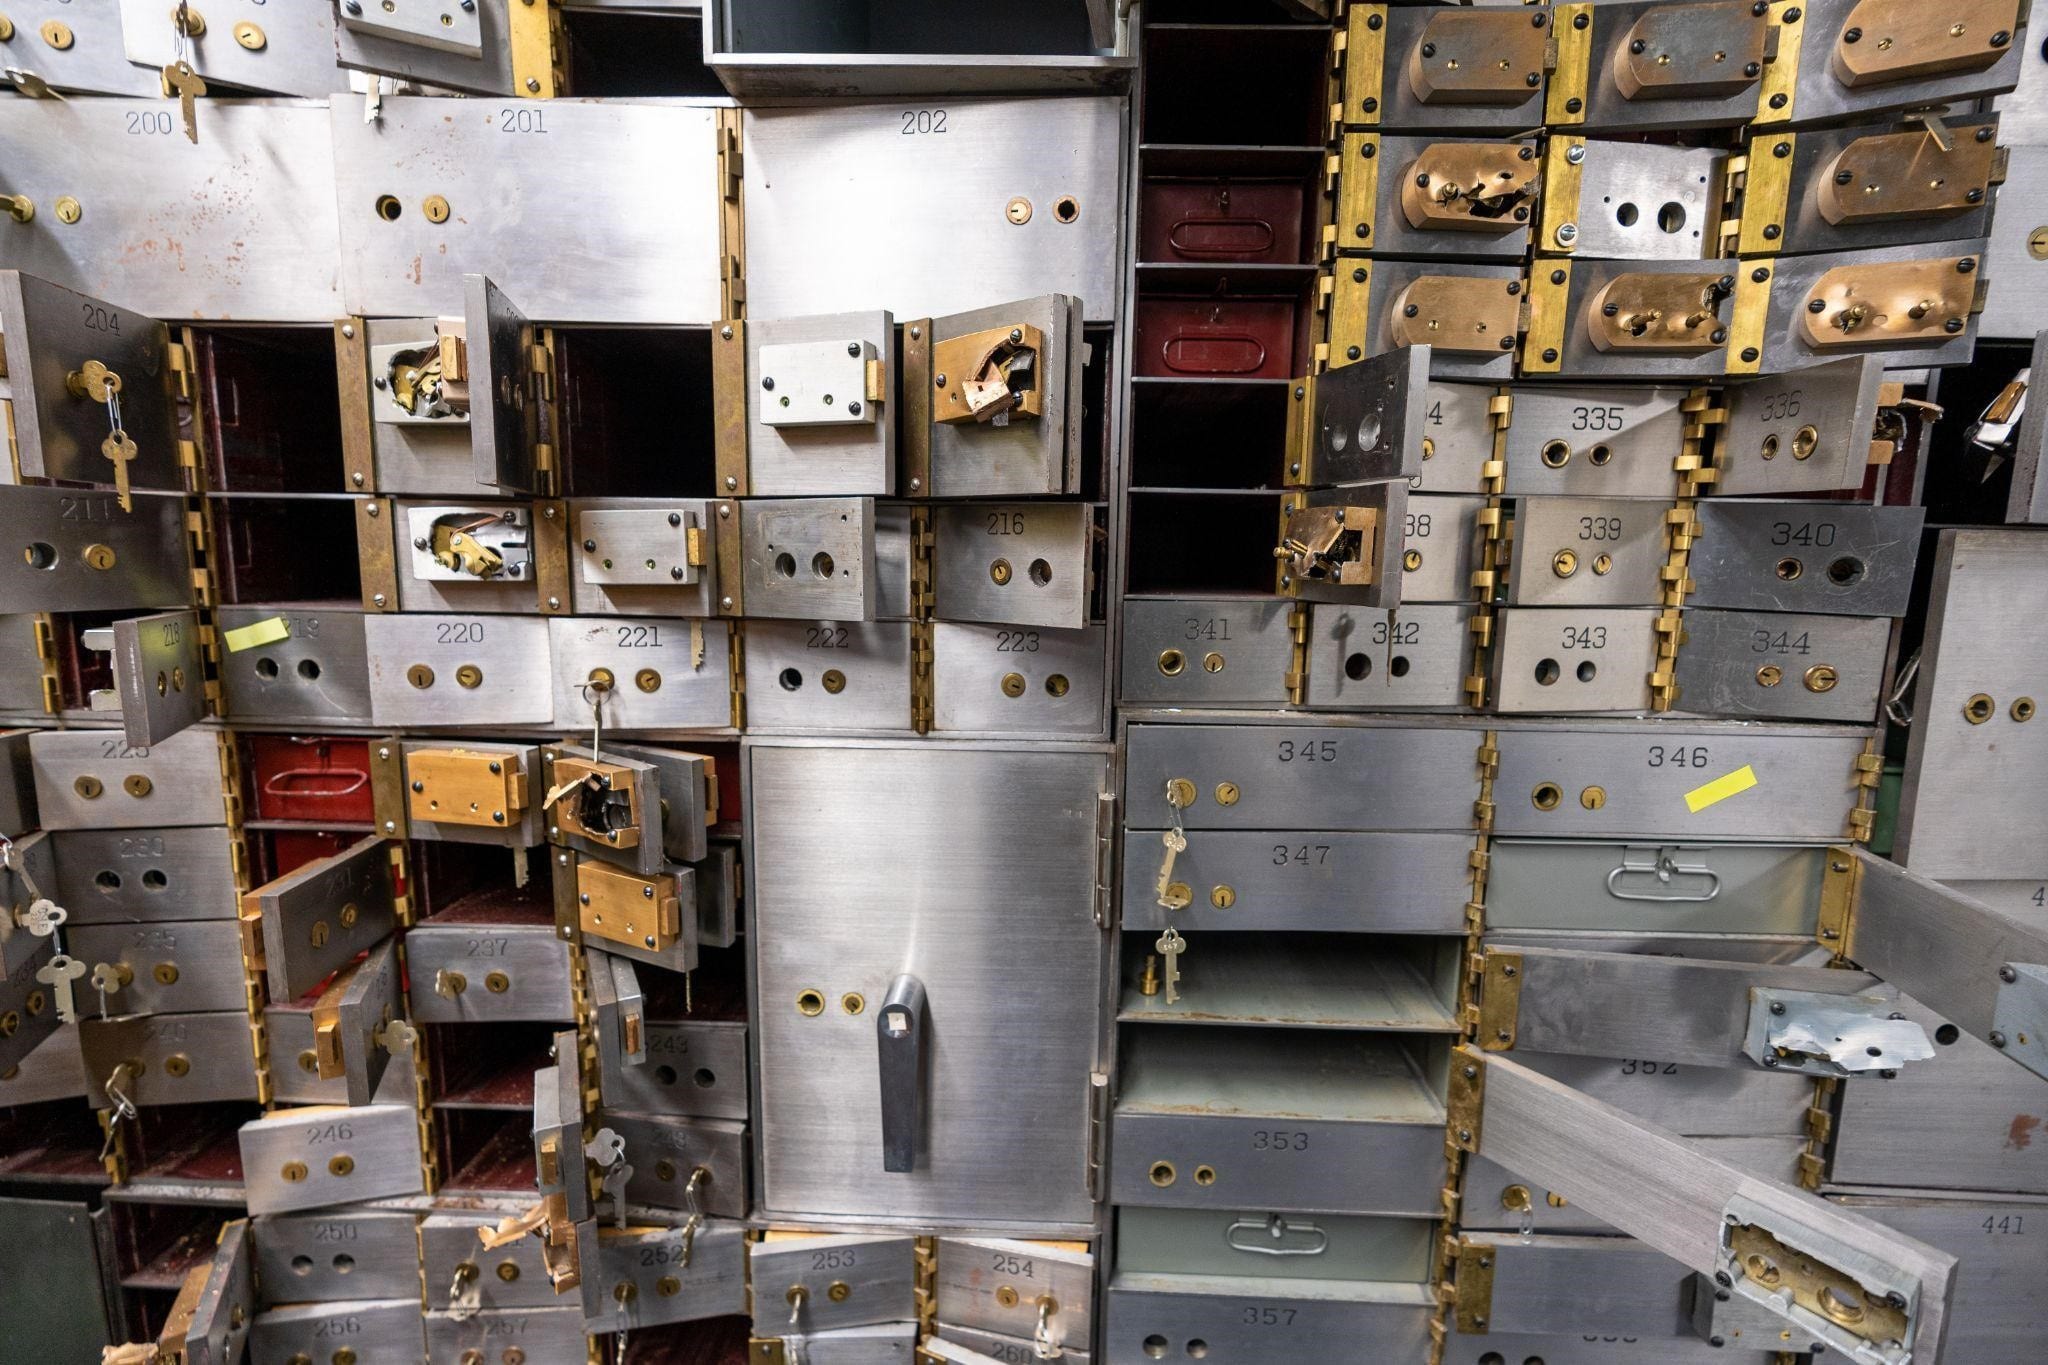 Safe deposit boxes emptied out in a bank vault.